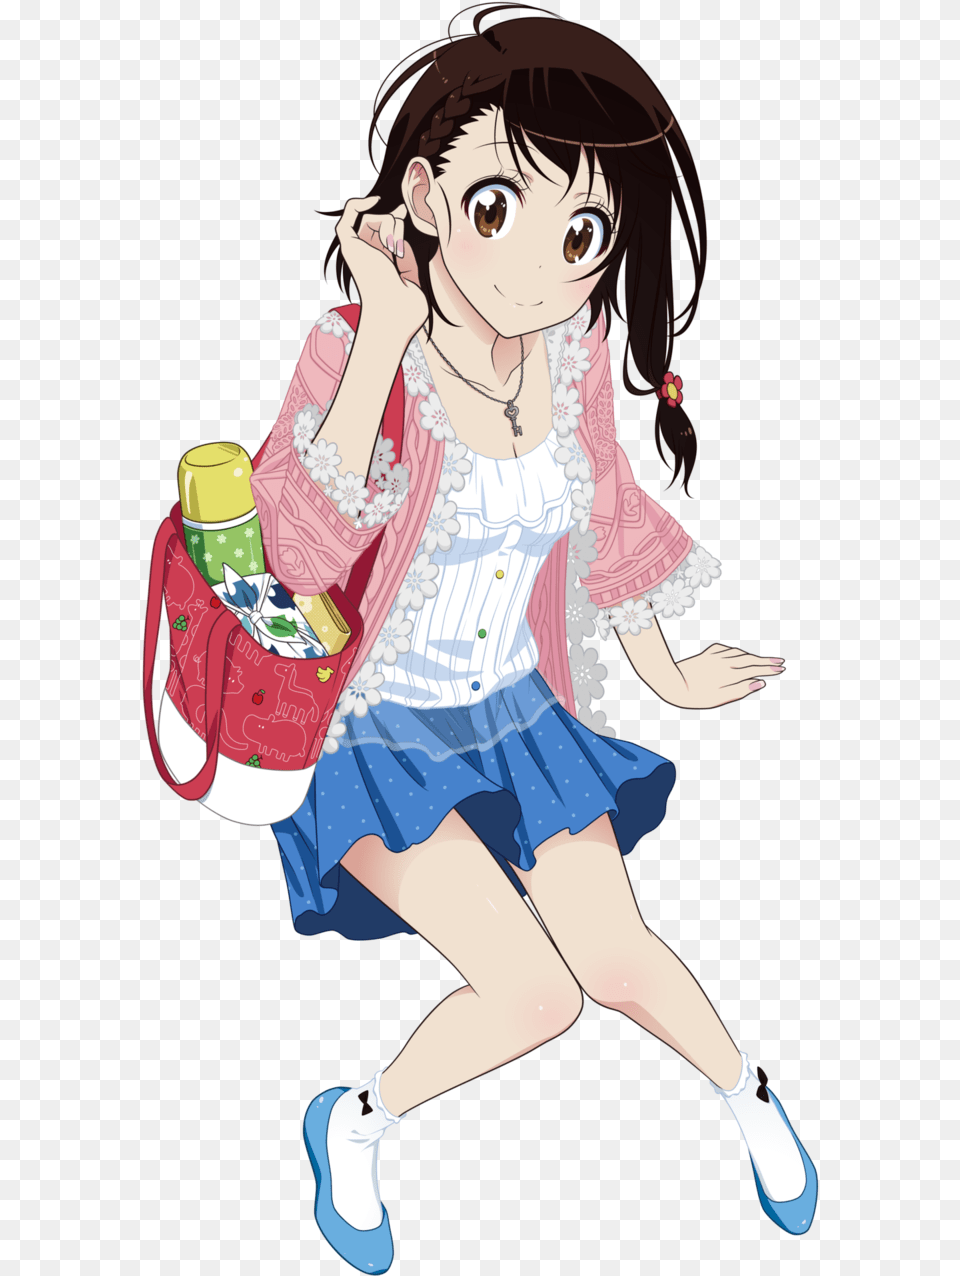 Image About Girl In Nisekoi By Minato Background Kosaki Onodera Transparent, Female, Publication, Book, Child Png